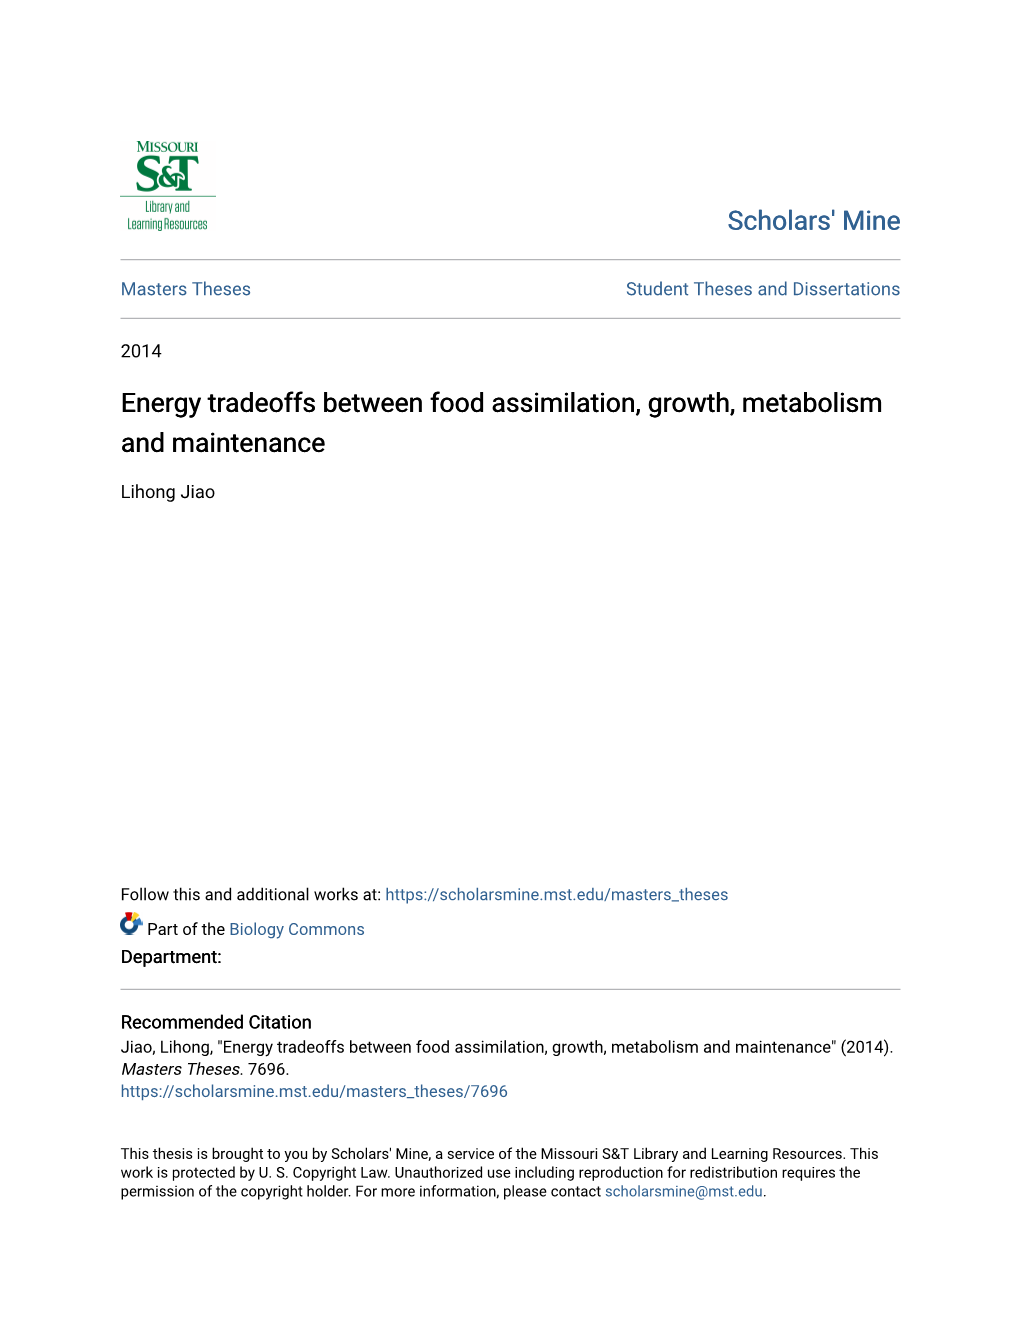 Energy Tradeoffs Between Food Assimilation, Growth, Metabolism and Maintenance